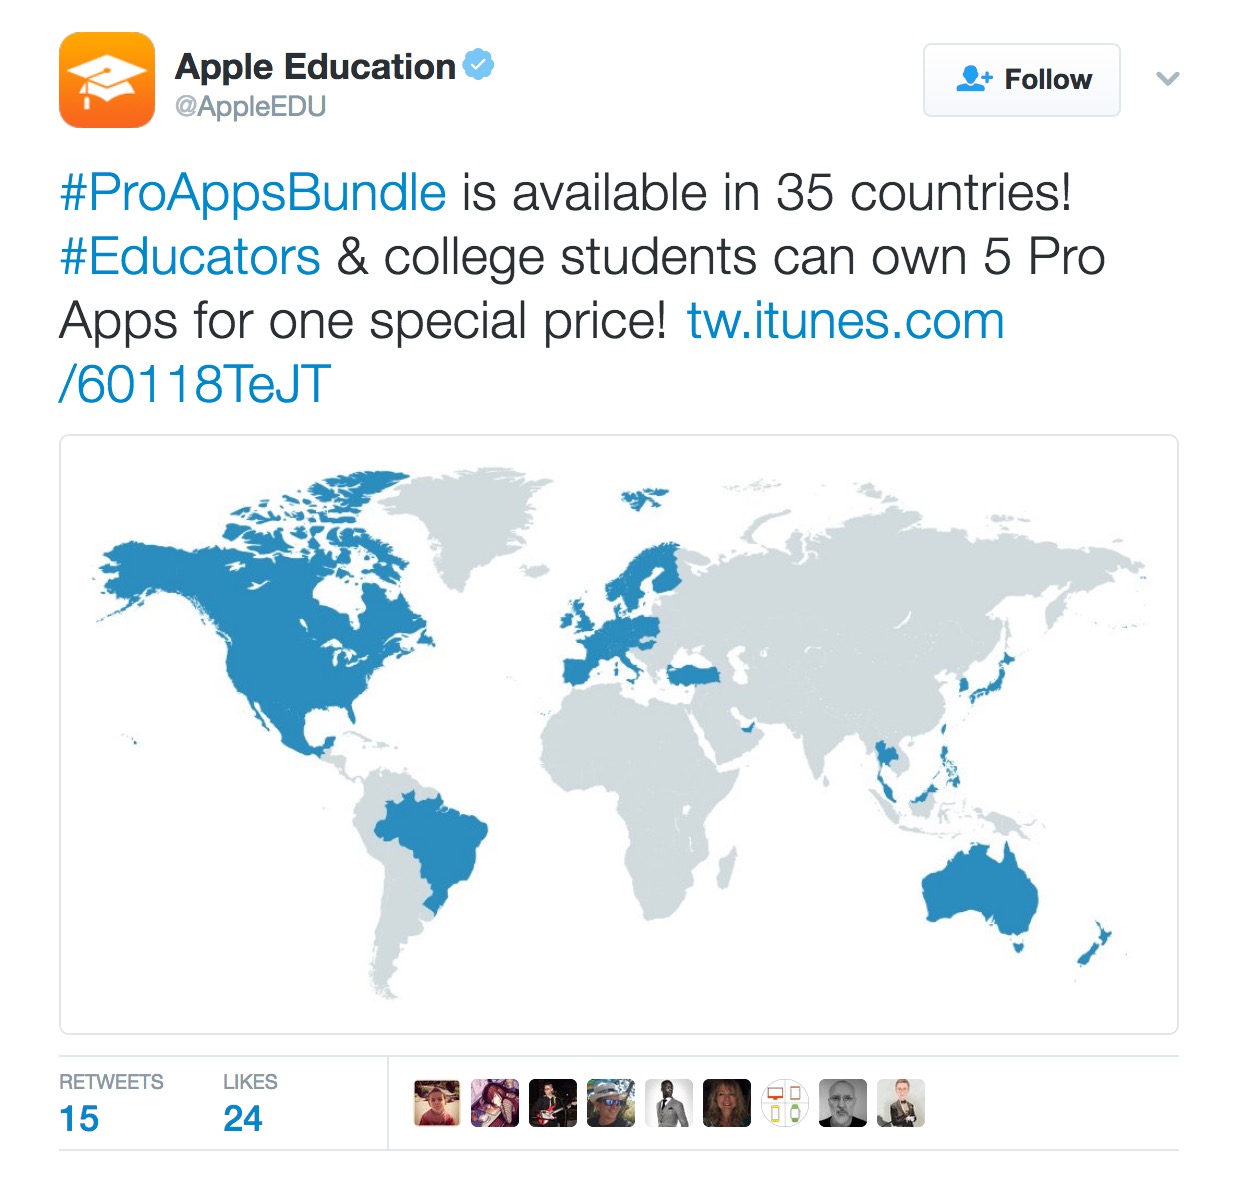 Apple Launches $199 Pro Apps Education Bundle in 35 Countries